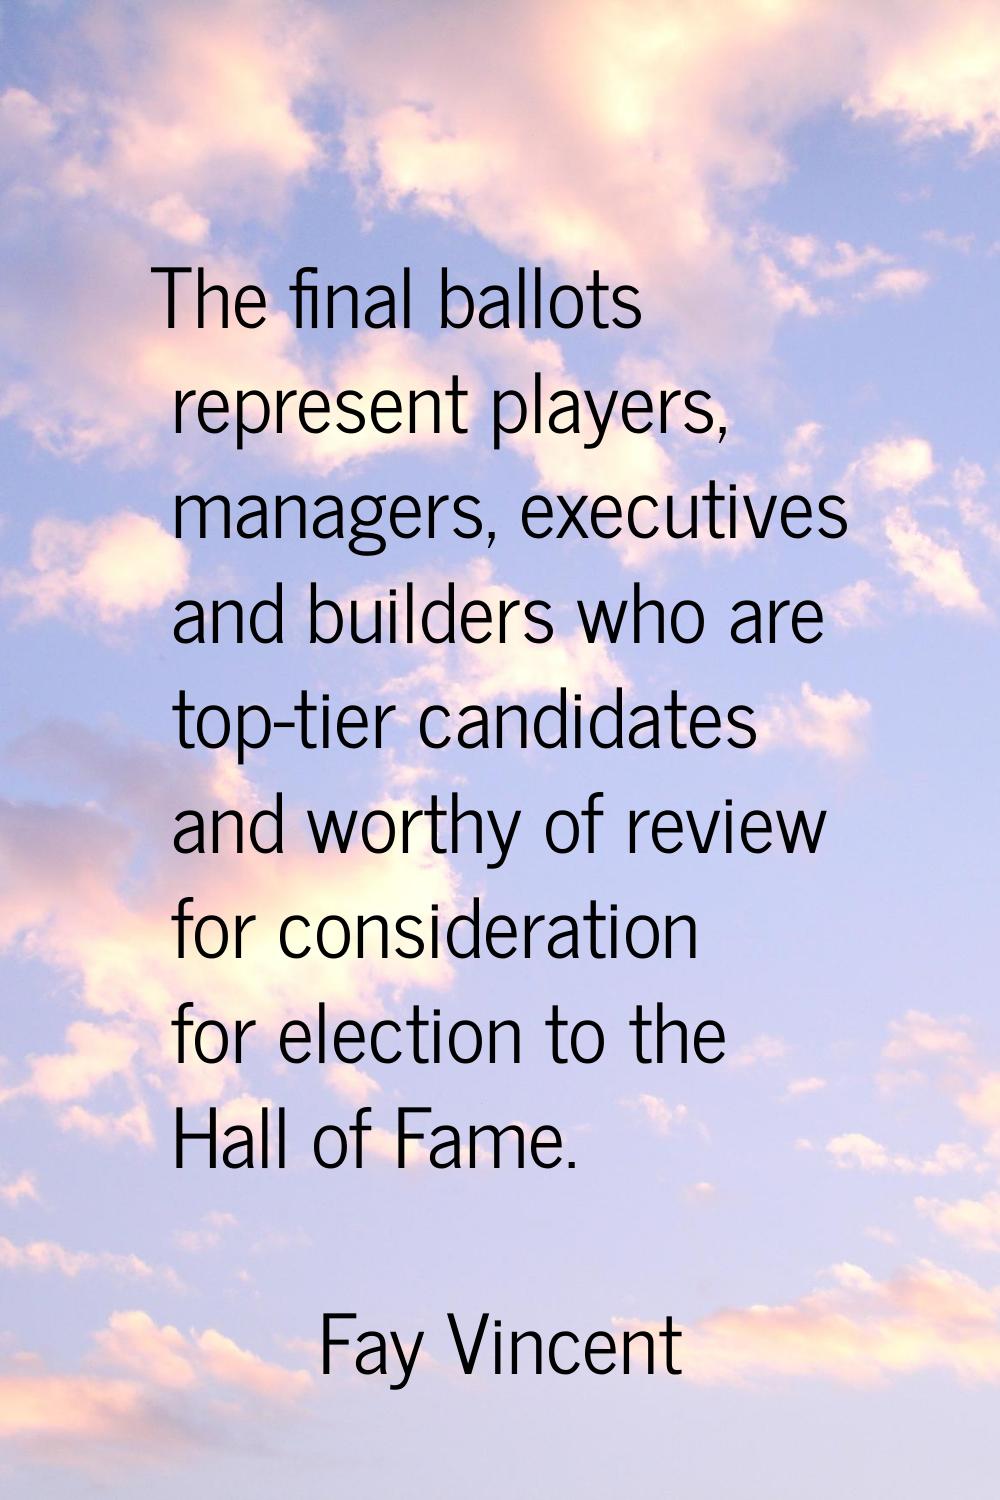 The final ballots represent players, managers, executives and builders who are top-tier candidates 